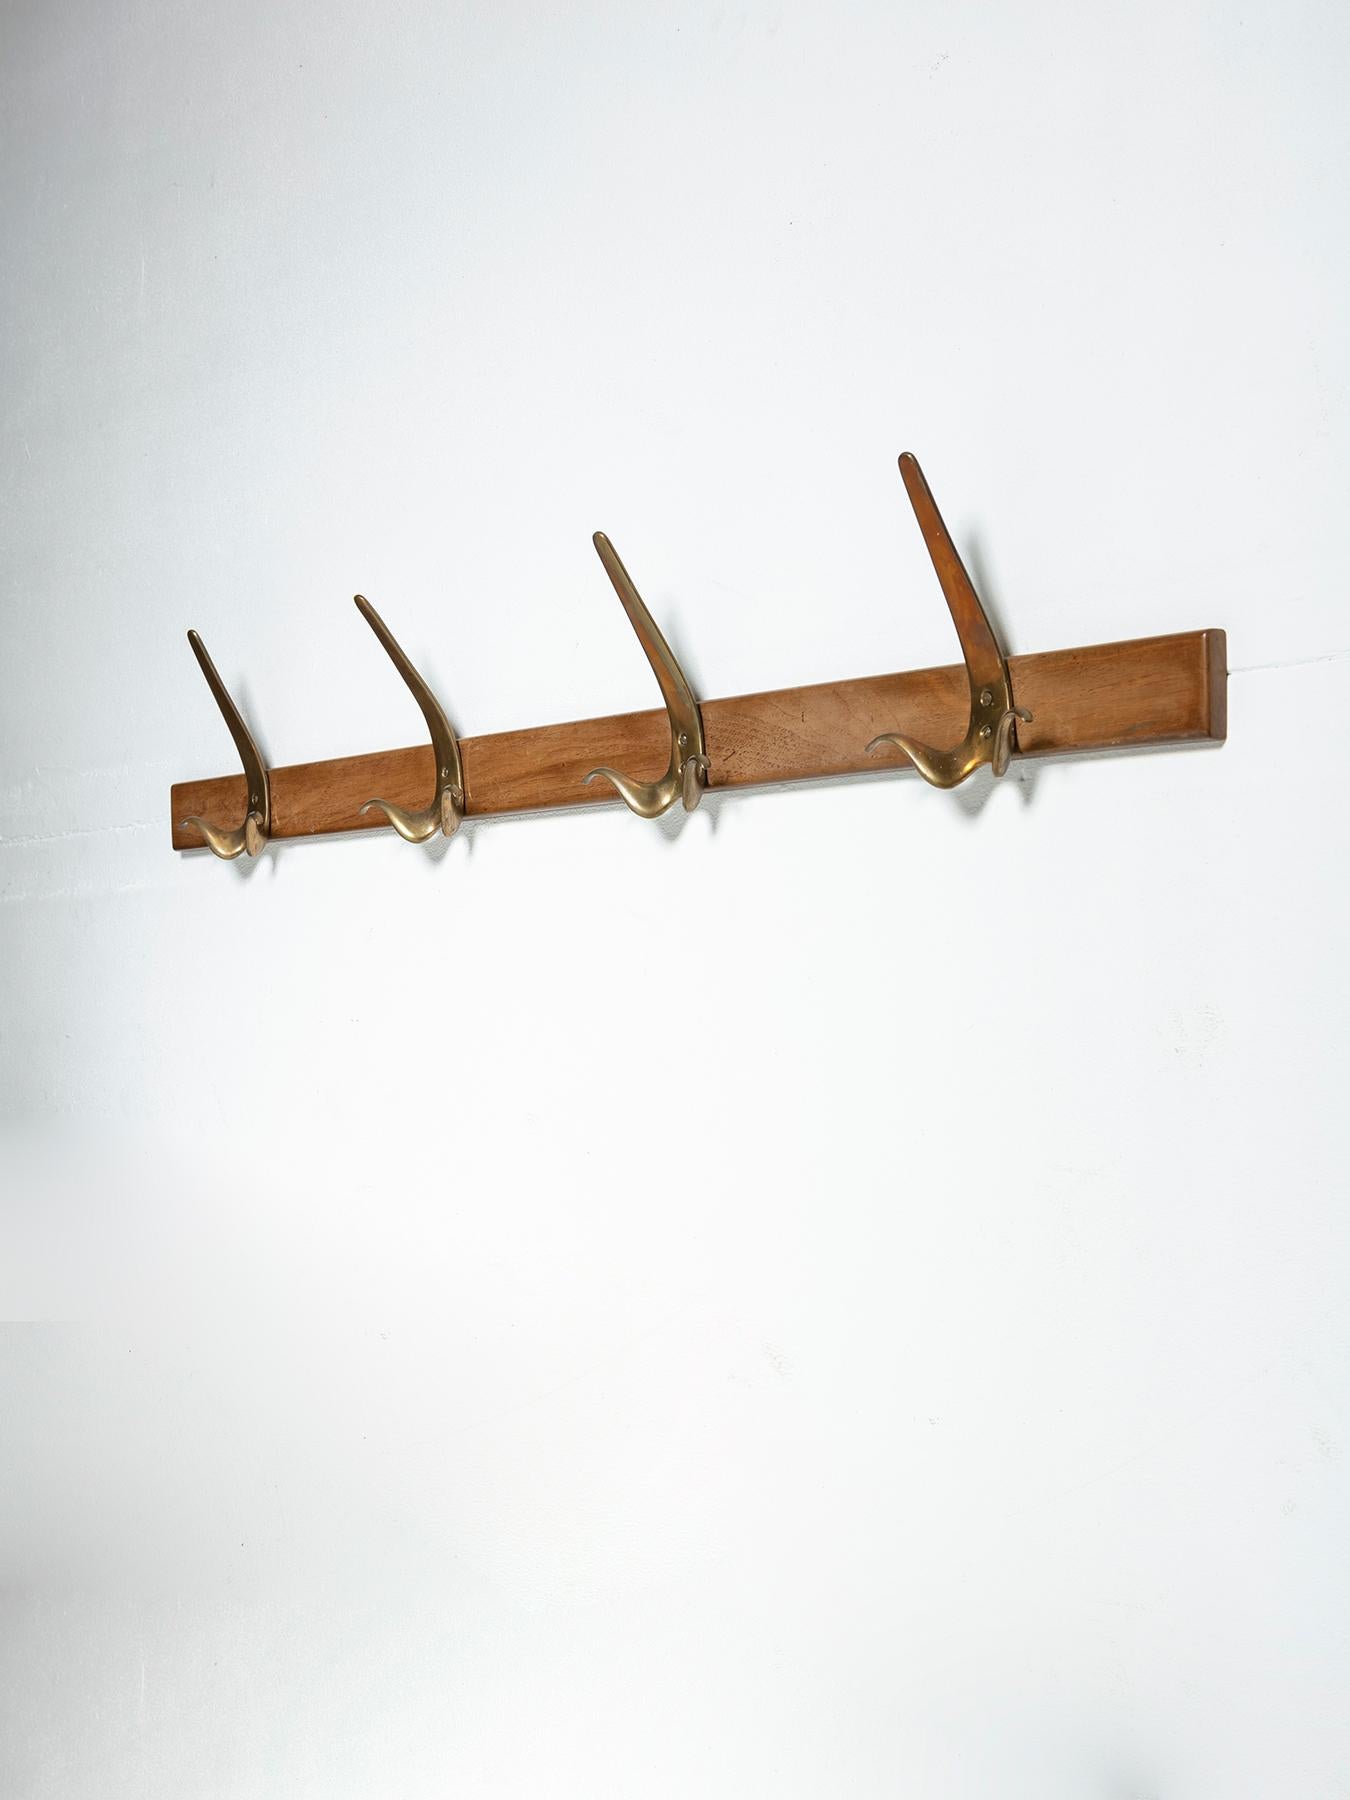 Rare coat rack composed by 4 bronze mustache shaped hooks on a wood bar.